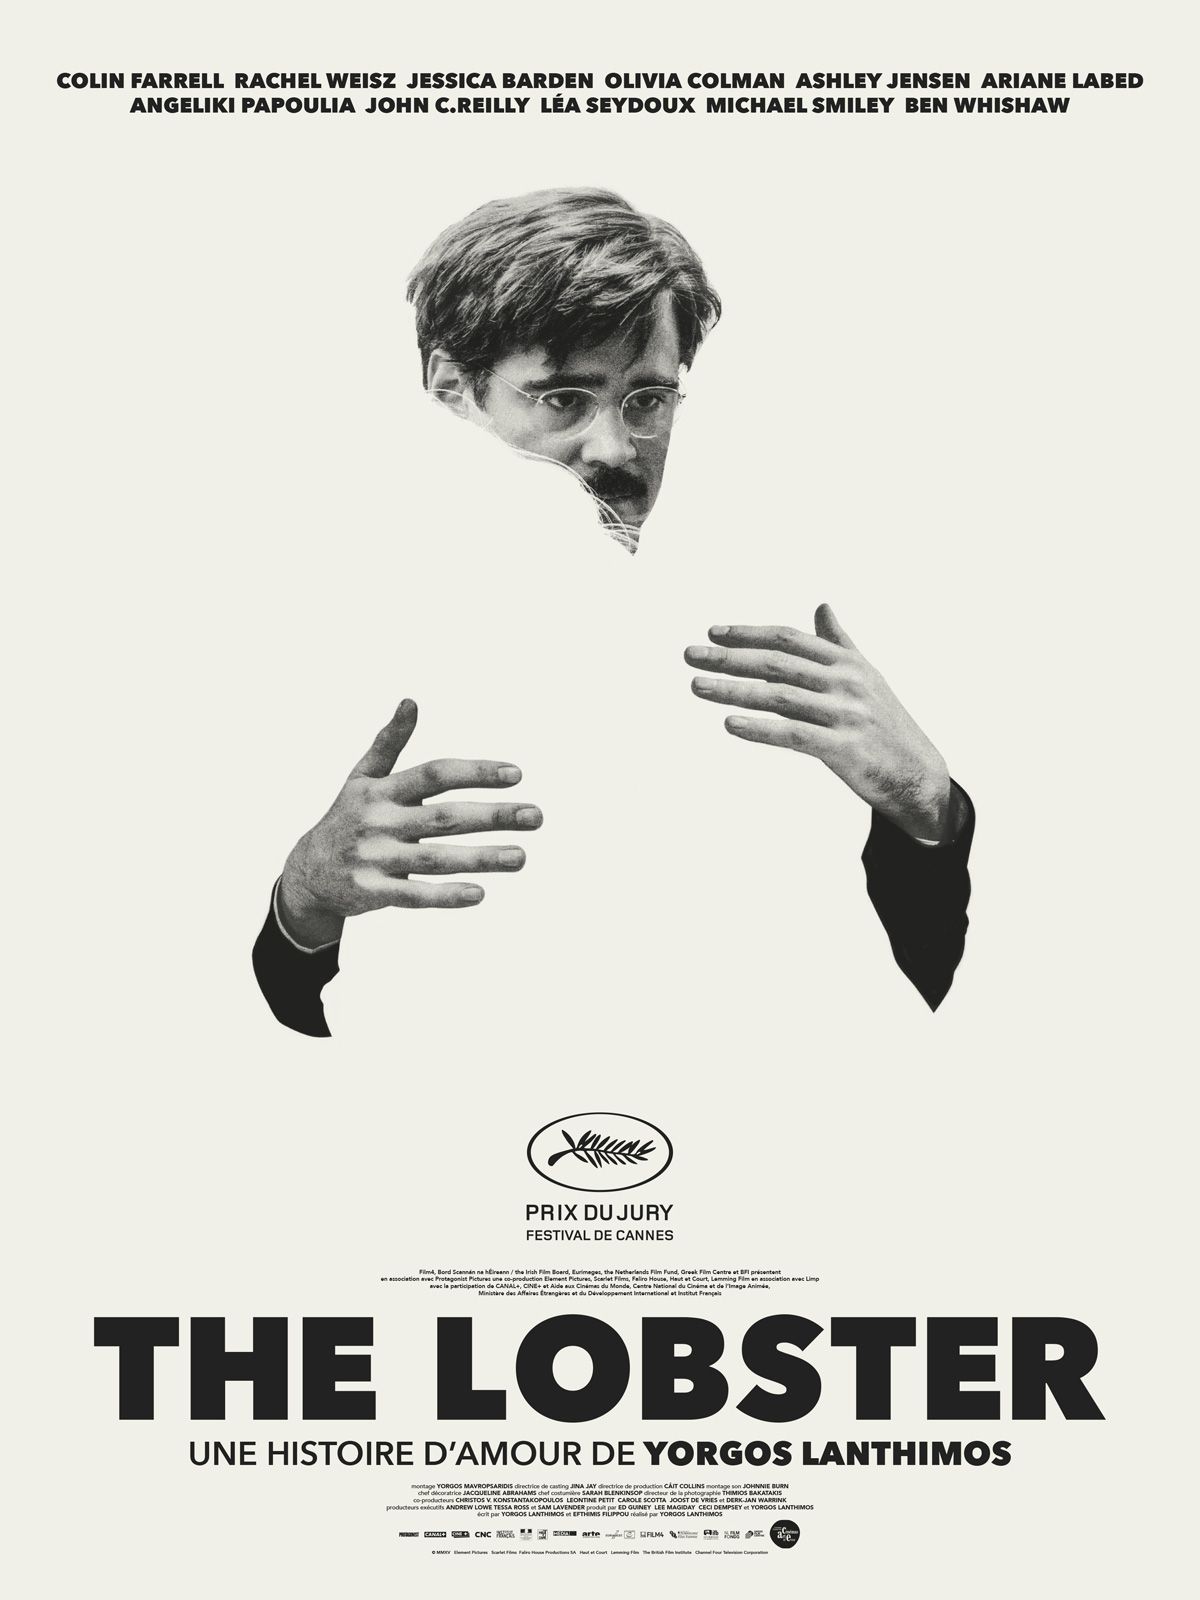 The Lobster - Film (2015) streaming VF gratuit complet